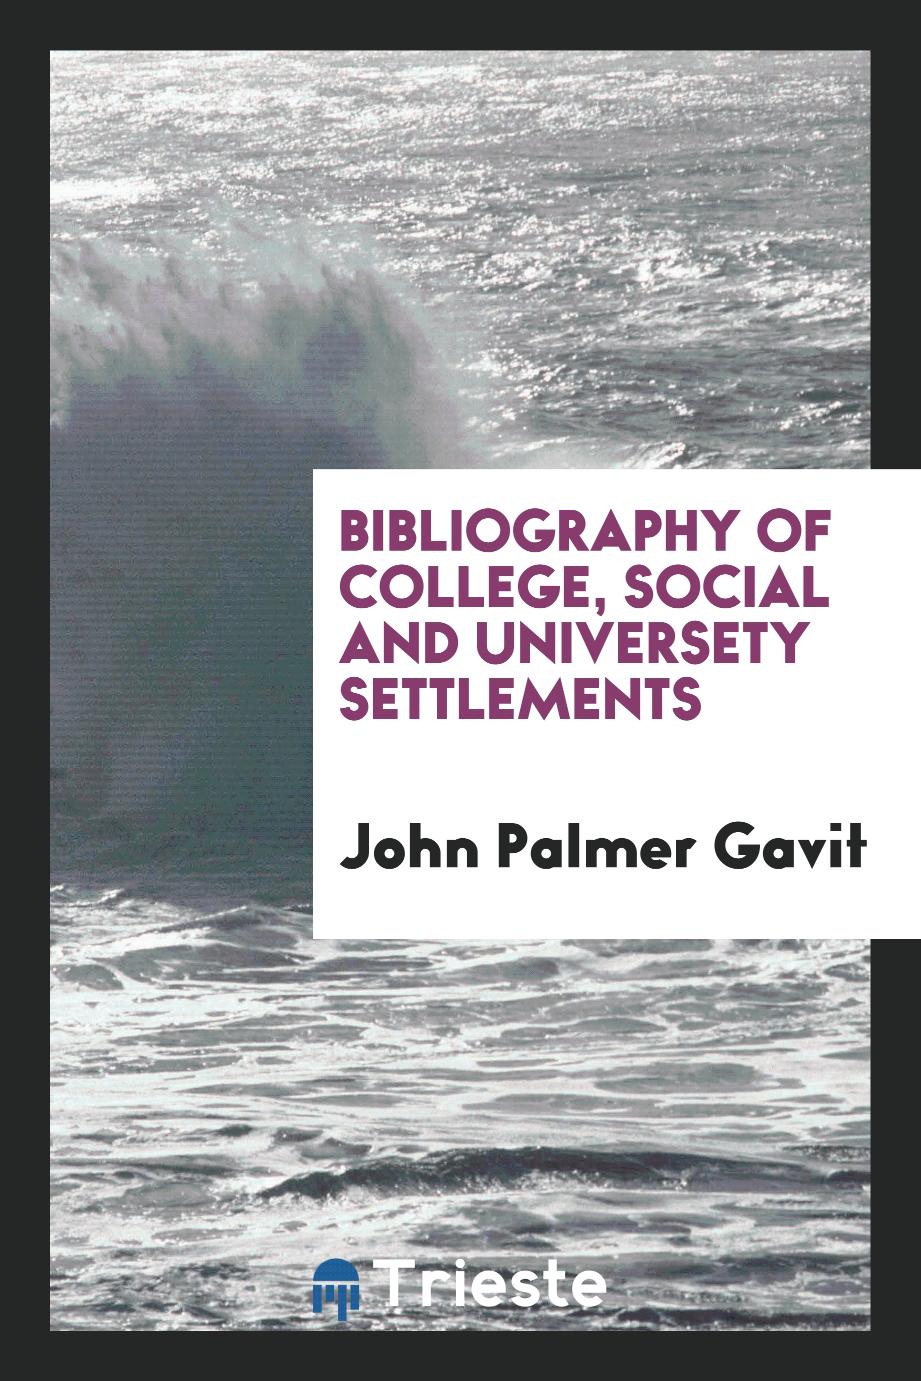 Bibliography of College, Social and Universety Settlements